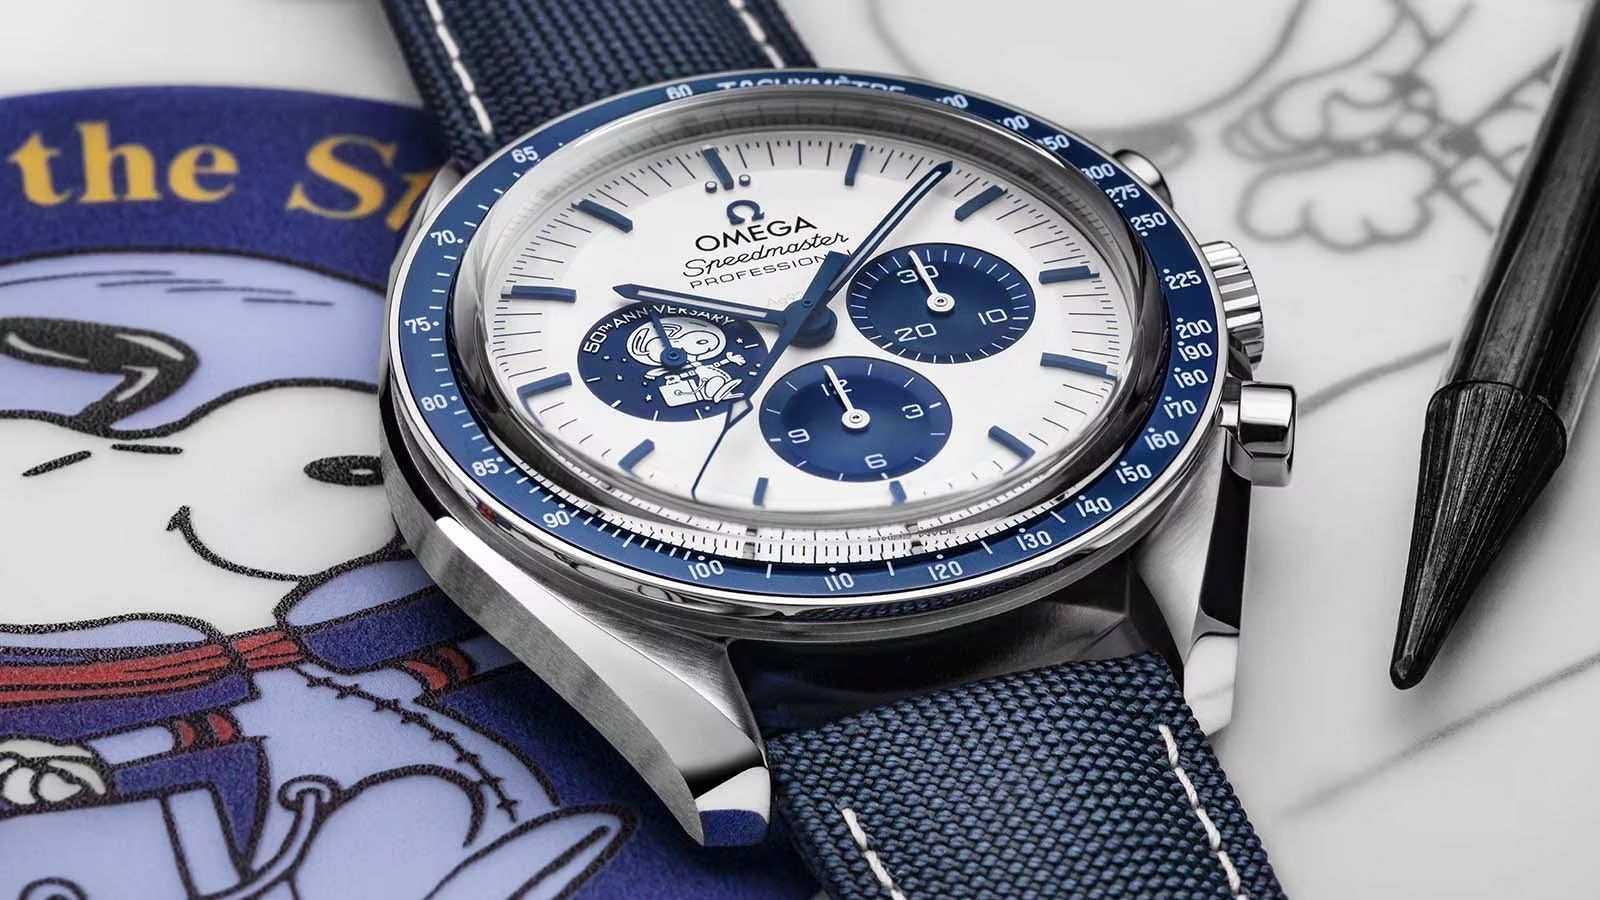 Why Are Watch Nerds All Wearing Snoopy Watches Right Now?